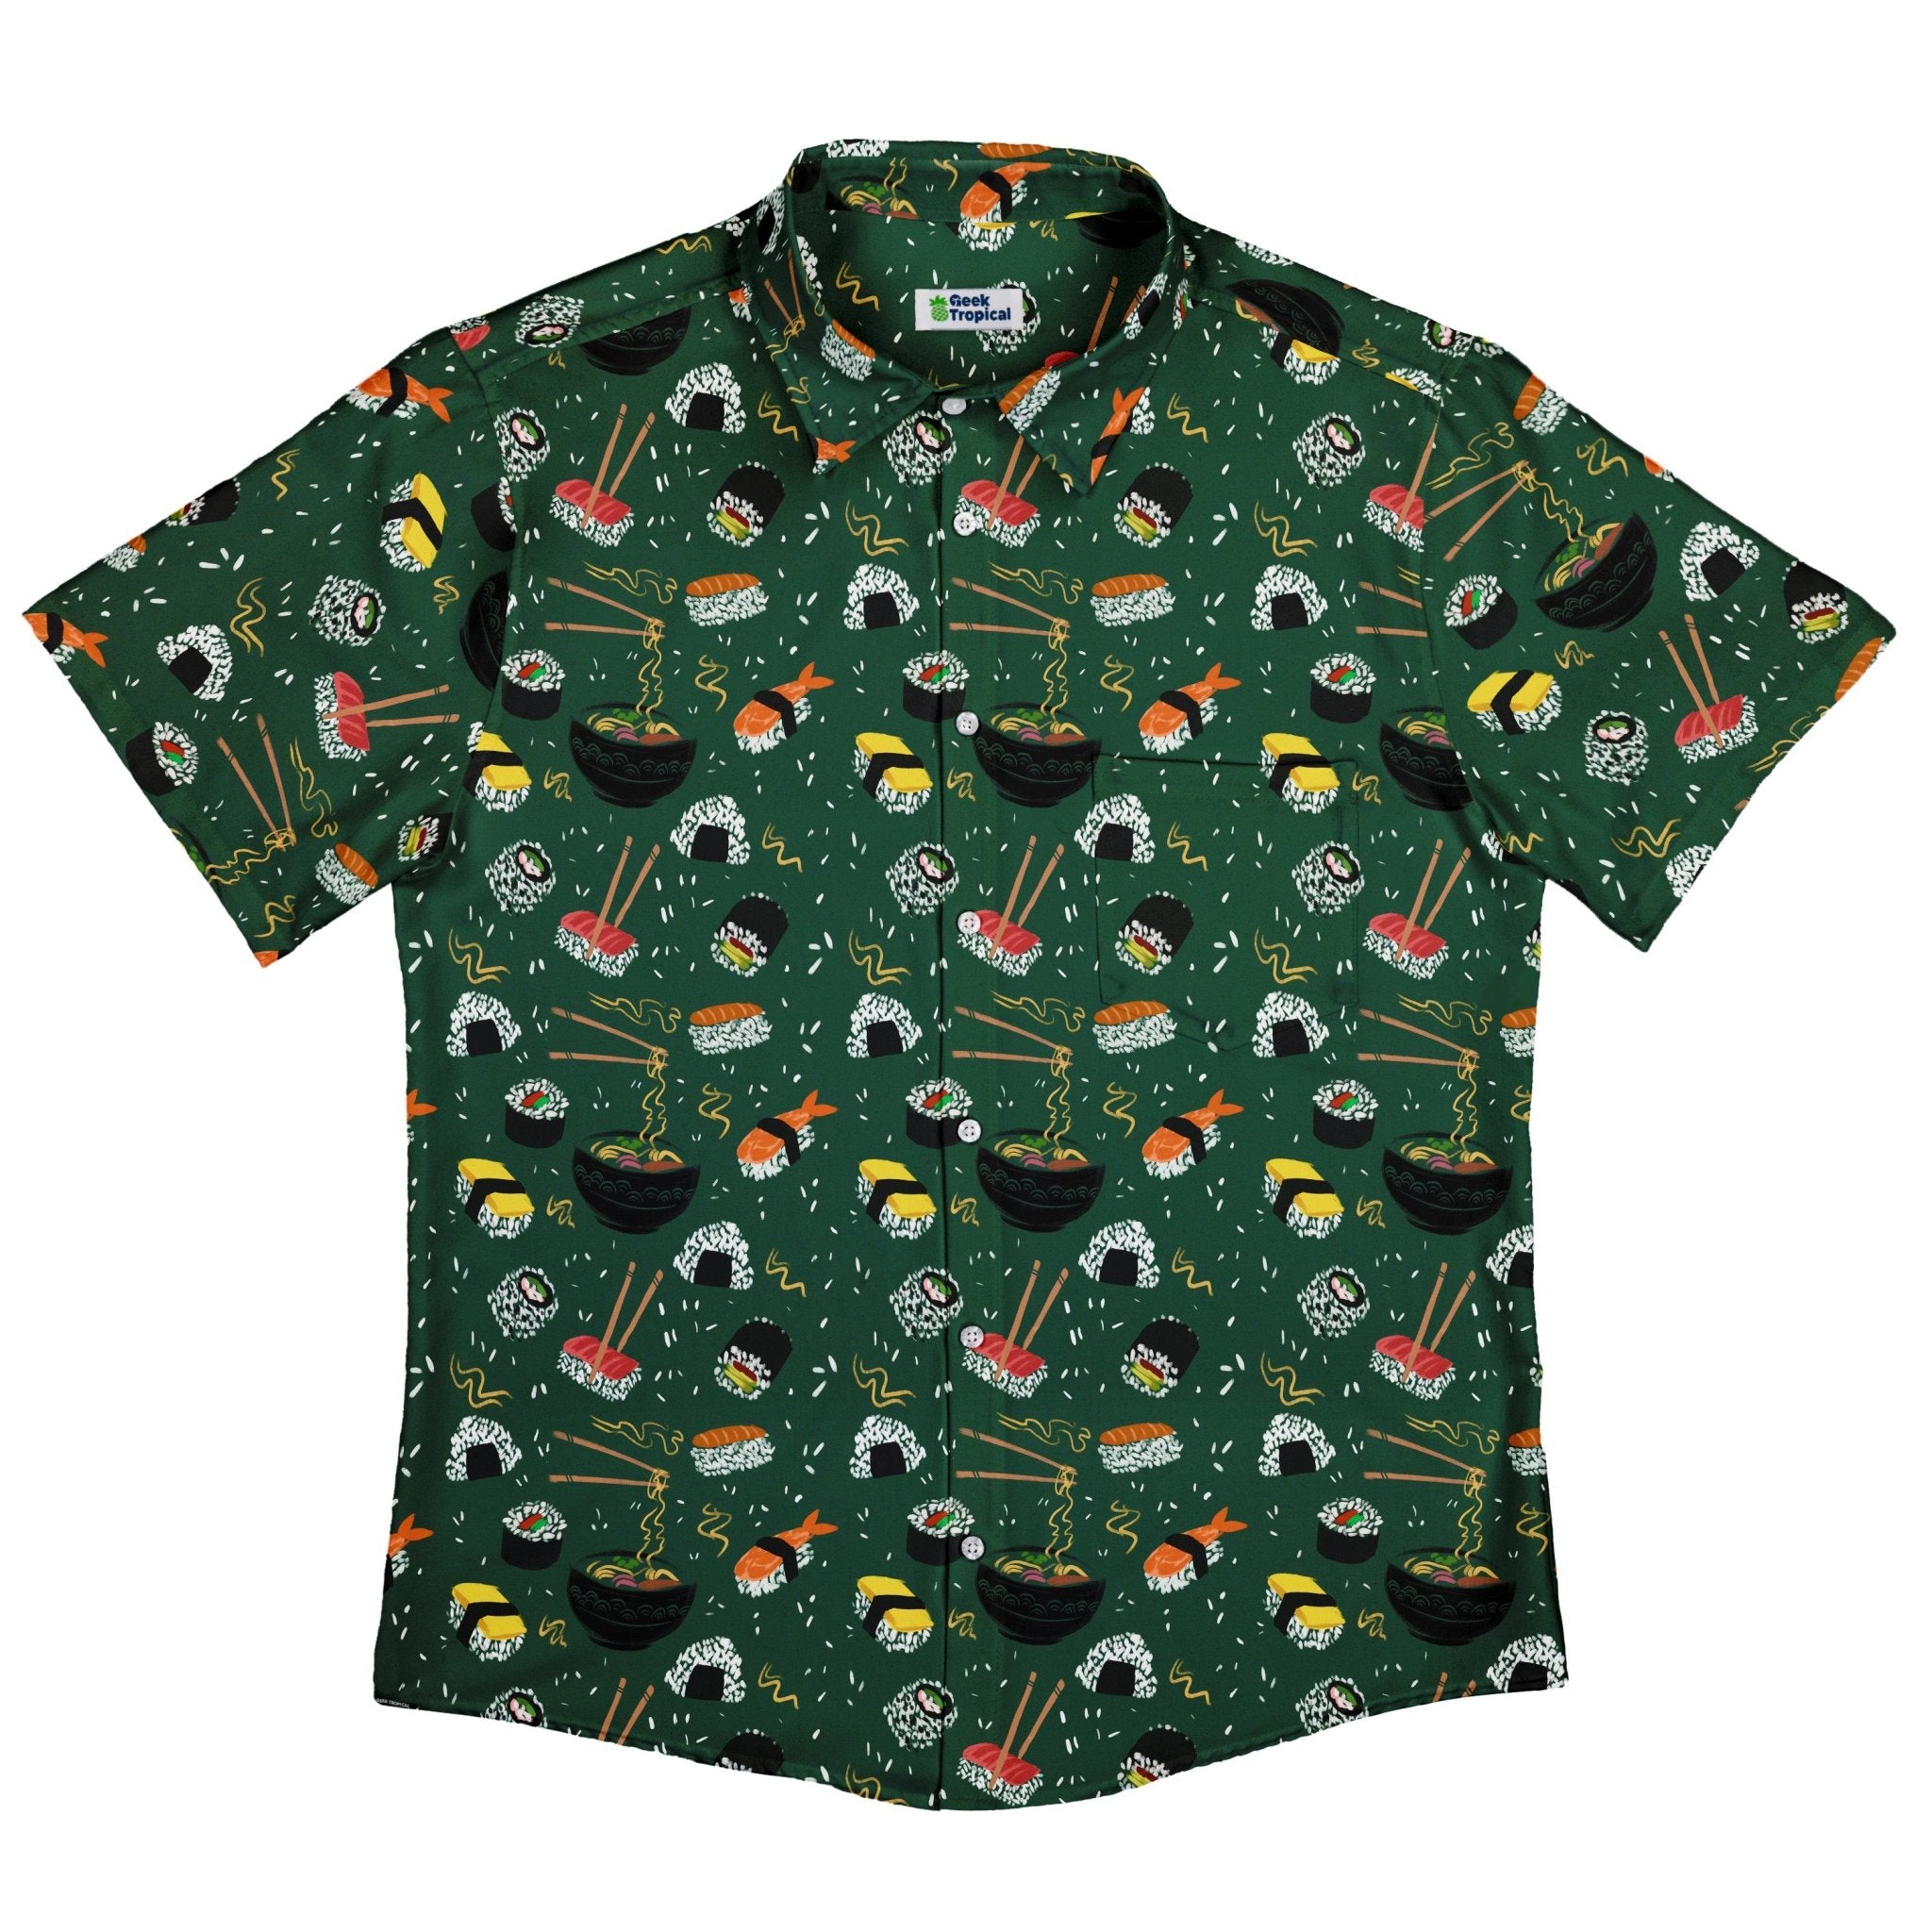 Ōishi Sushi Green Button Up Shirt - adult sizing - Anime - Design by Claire Murphy